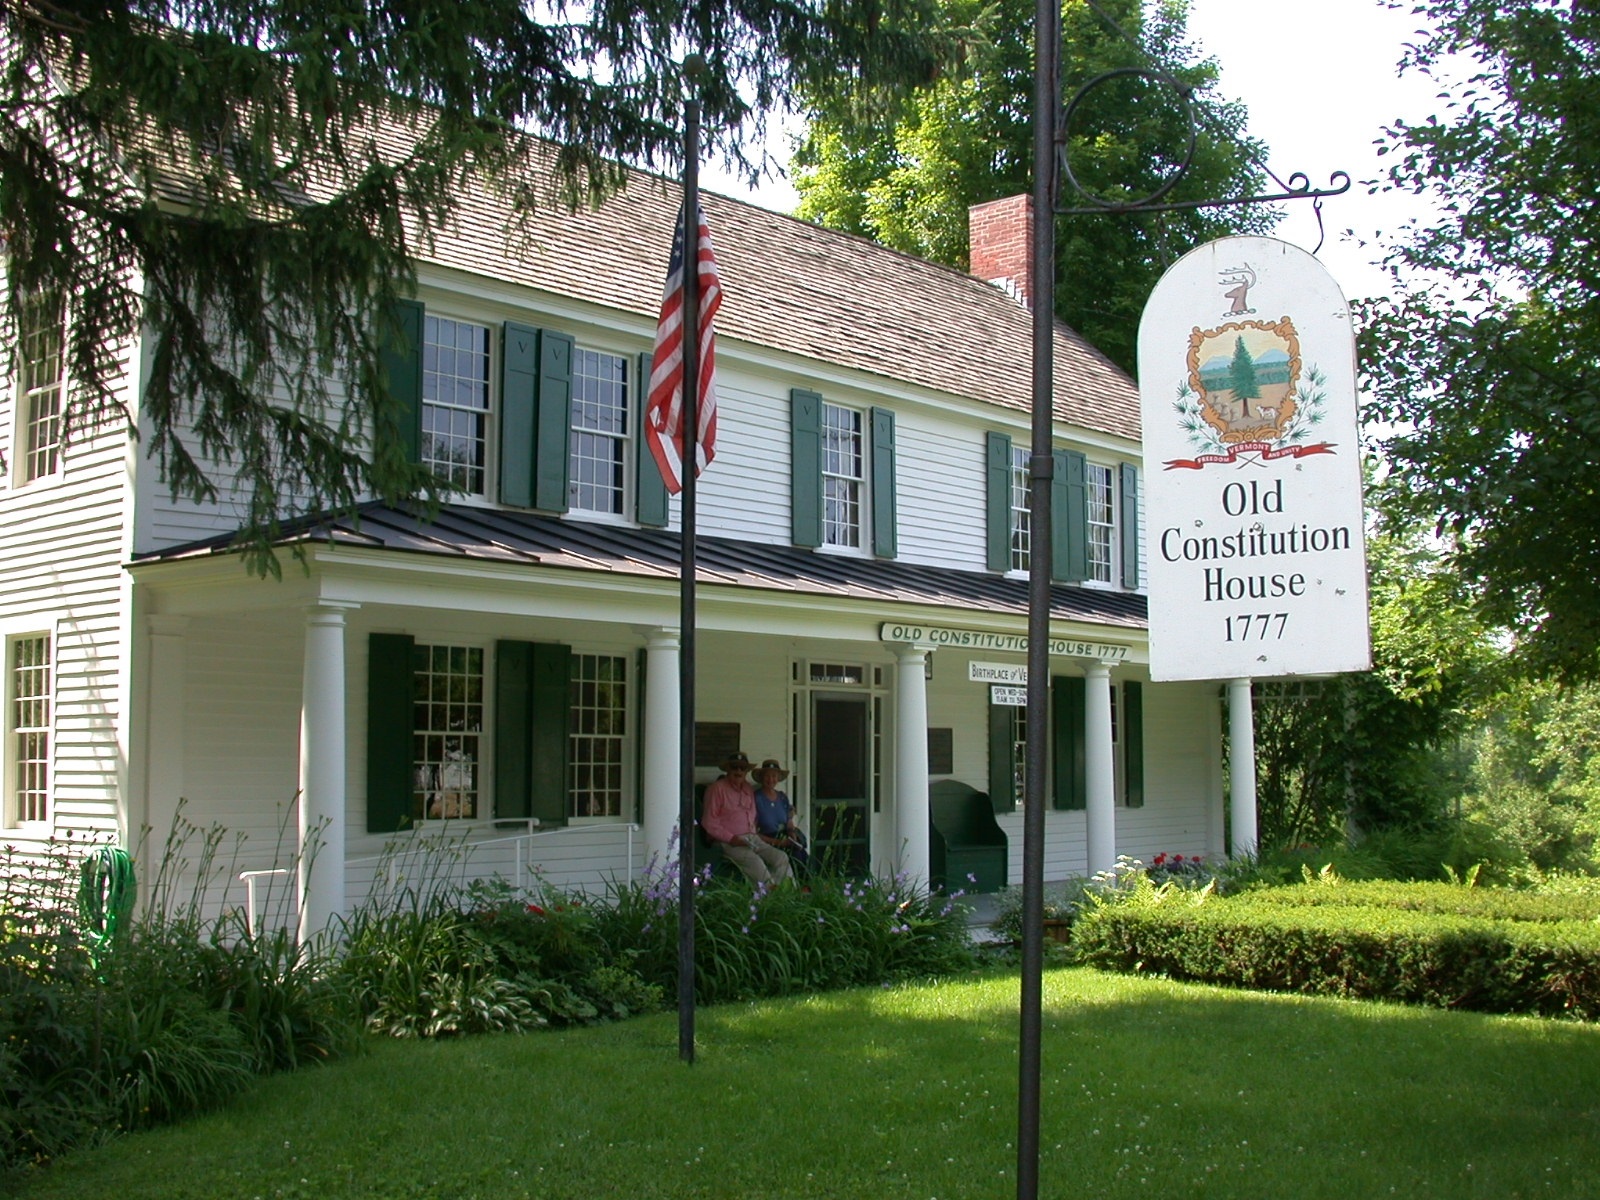 Old Constitution House, Windsor, Vermont